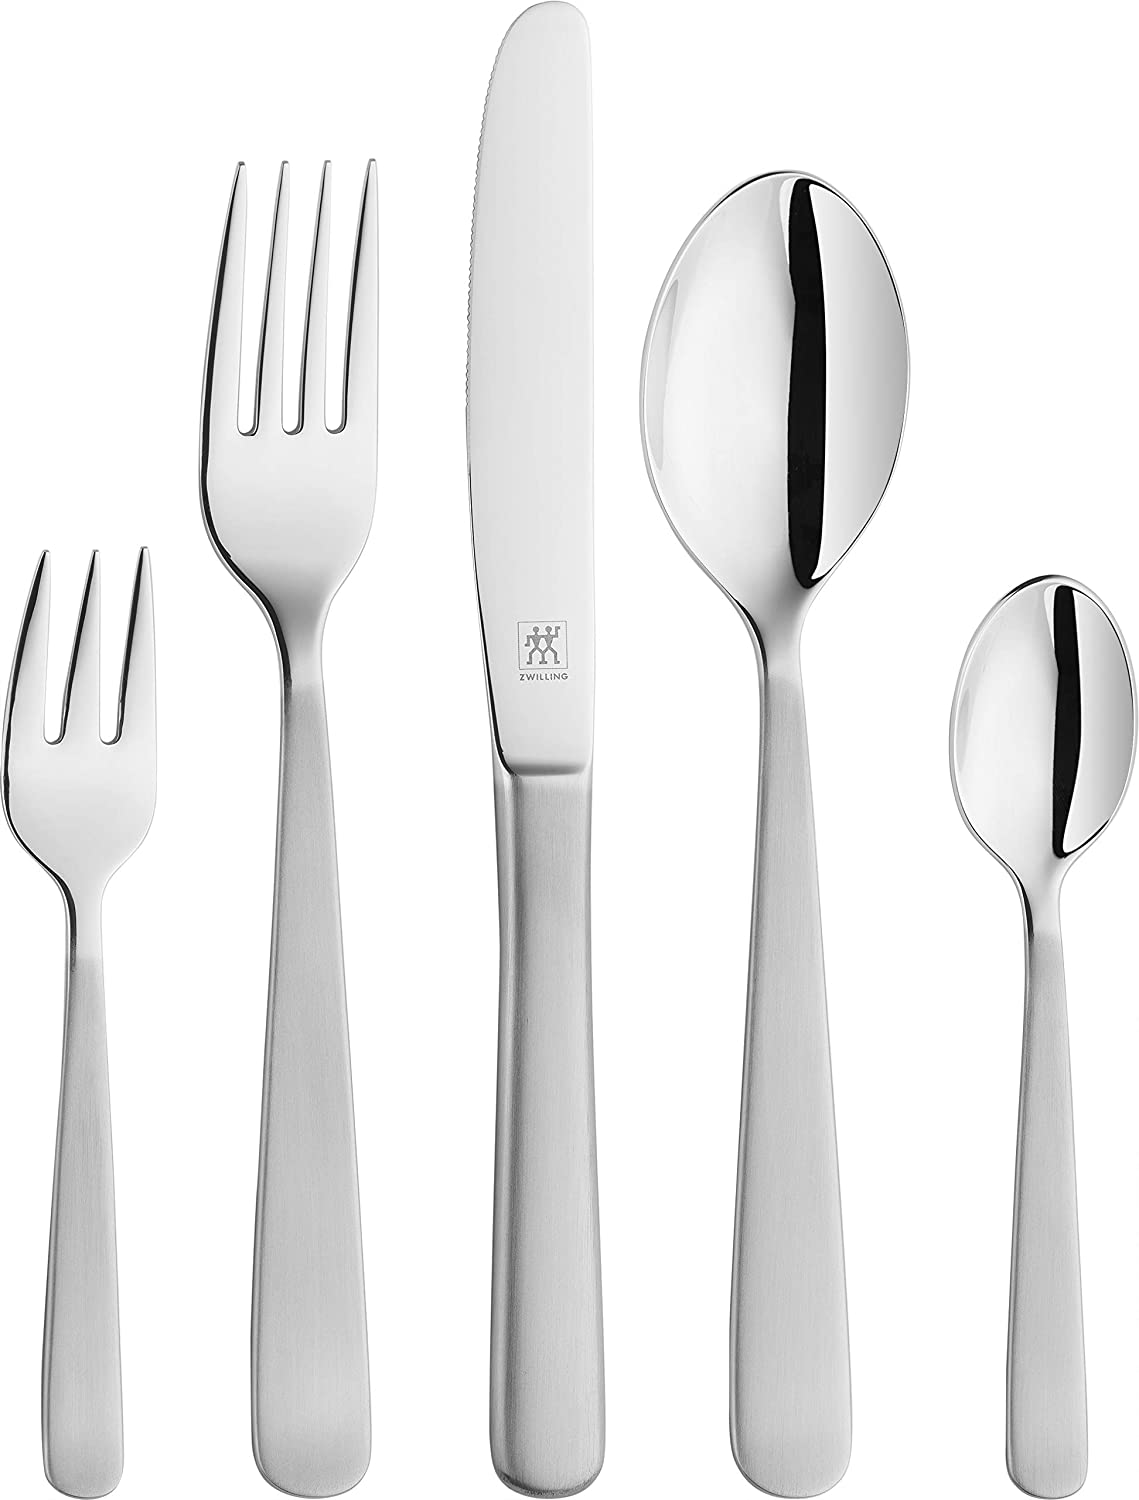 Zwilling Trend 02790-660-0 cutlery set for 12 people, matte, 18/10 stainless steel, 60 pieces.